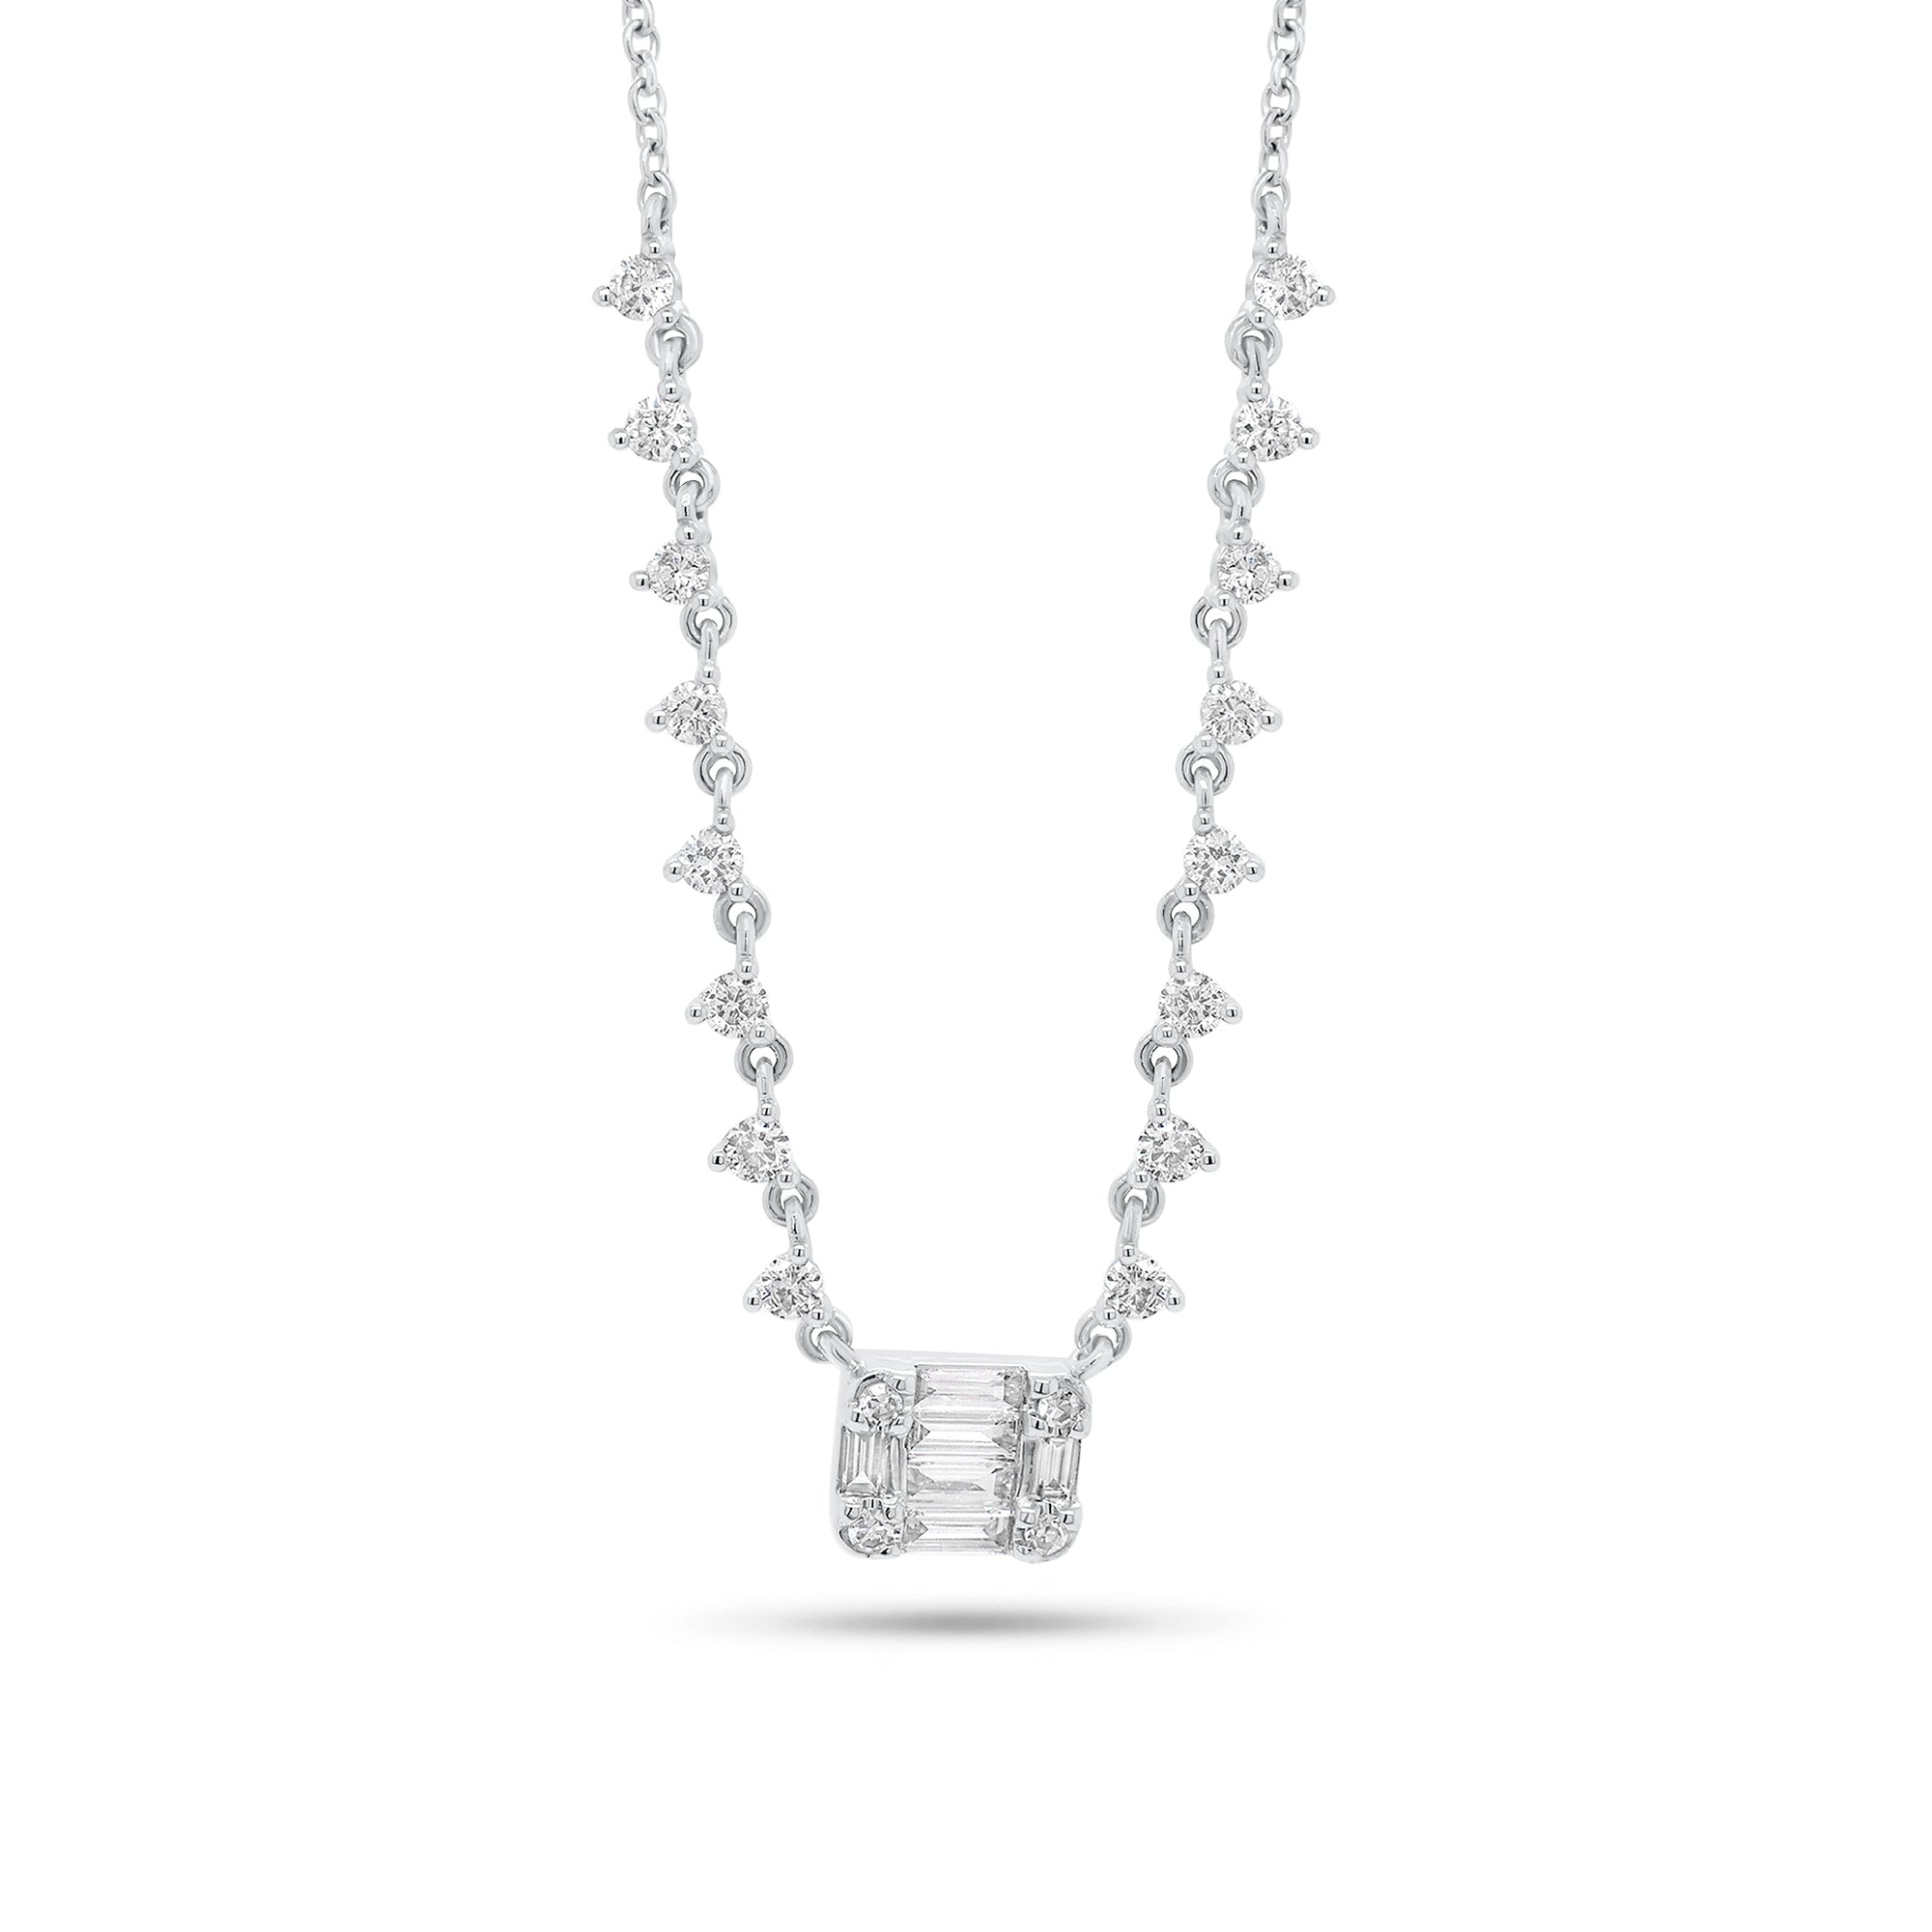 Emerald-Cut Diamond Illusion Pendant on Diamond Chain - 14K gold weighing 3.0 grams  - 24 round diamonds weighing 0.48 carats  - 6 straight baguettes weighing 0.20 carats